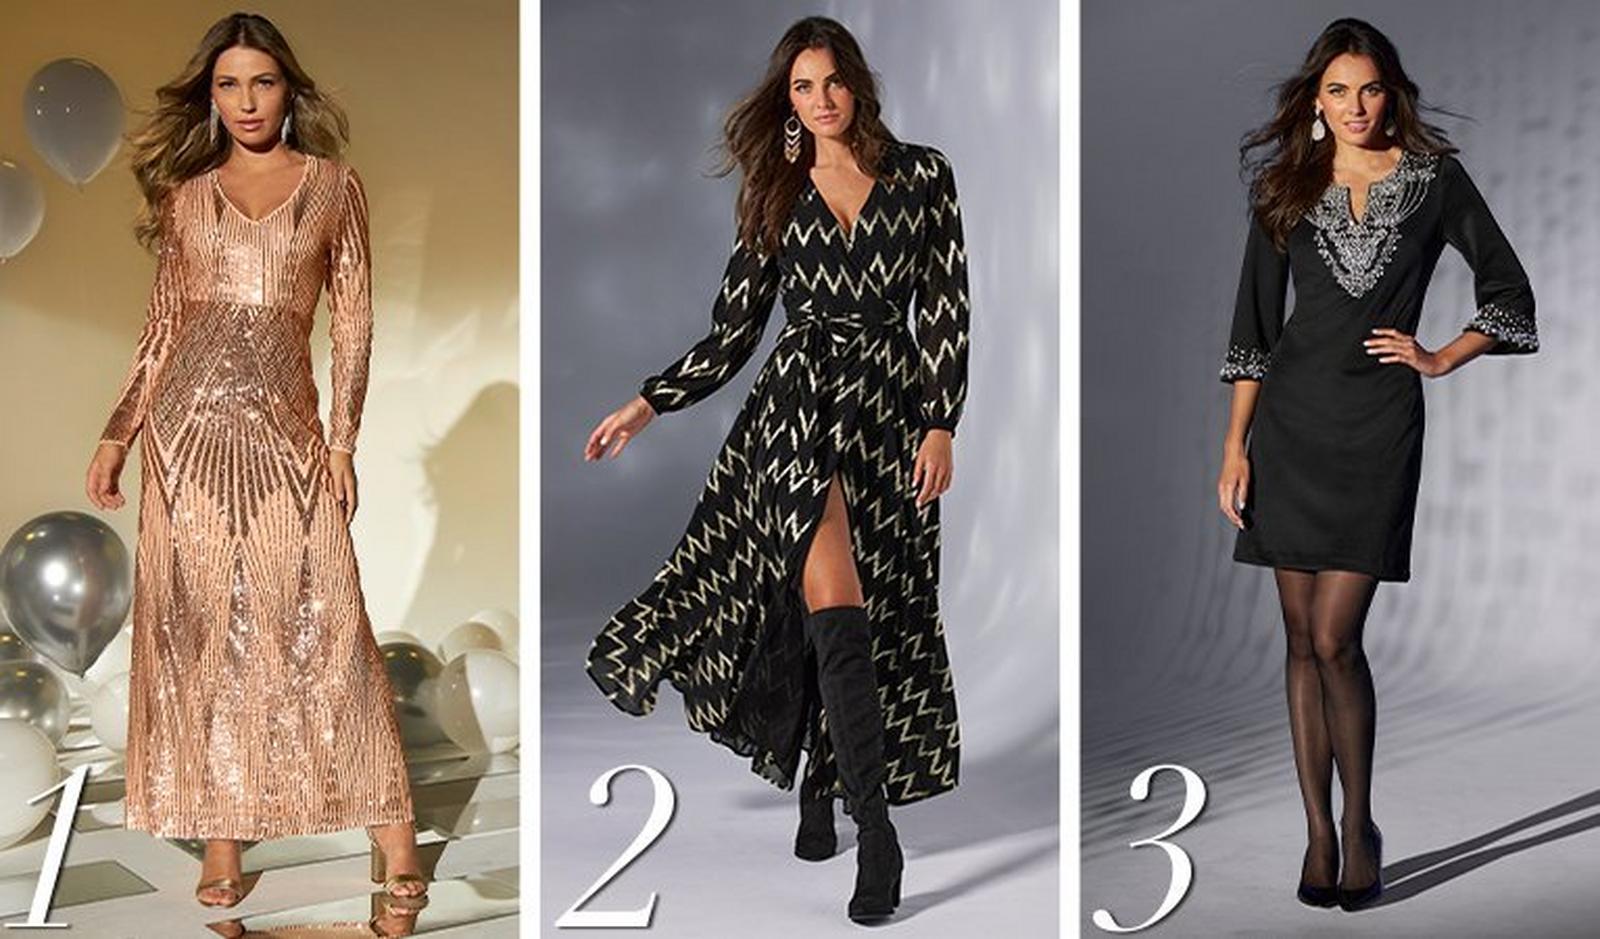 from left to right: first model wearing a blush sequin embellished long-sleeve v-neck maxi dress. second model wearing a black and gold chevron long-sleeve maxi wrap dress and black suede over-the-knee boots. third model wearing a black jewel embellished three-quarter sleeve sheath dress, black tights, and black pumps.